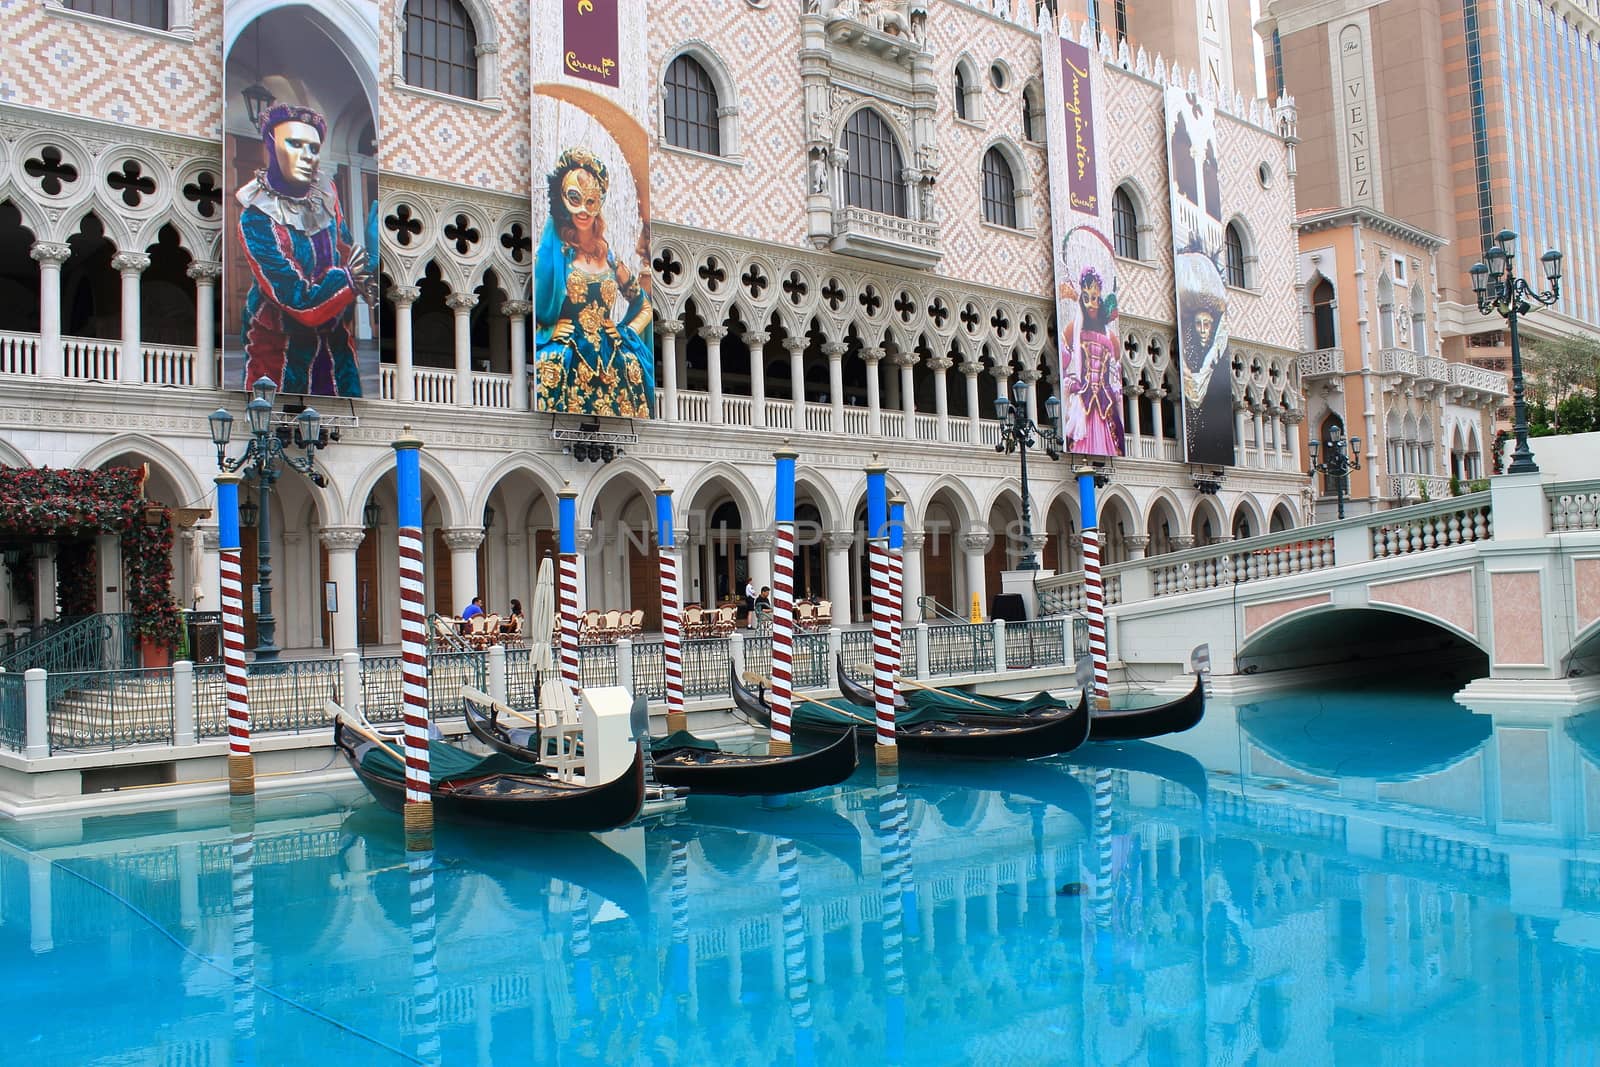 Gondola rides at the Venetian Hotel and Casino in Las Vegas on the famous Strip